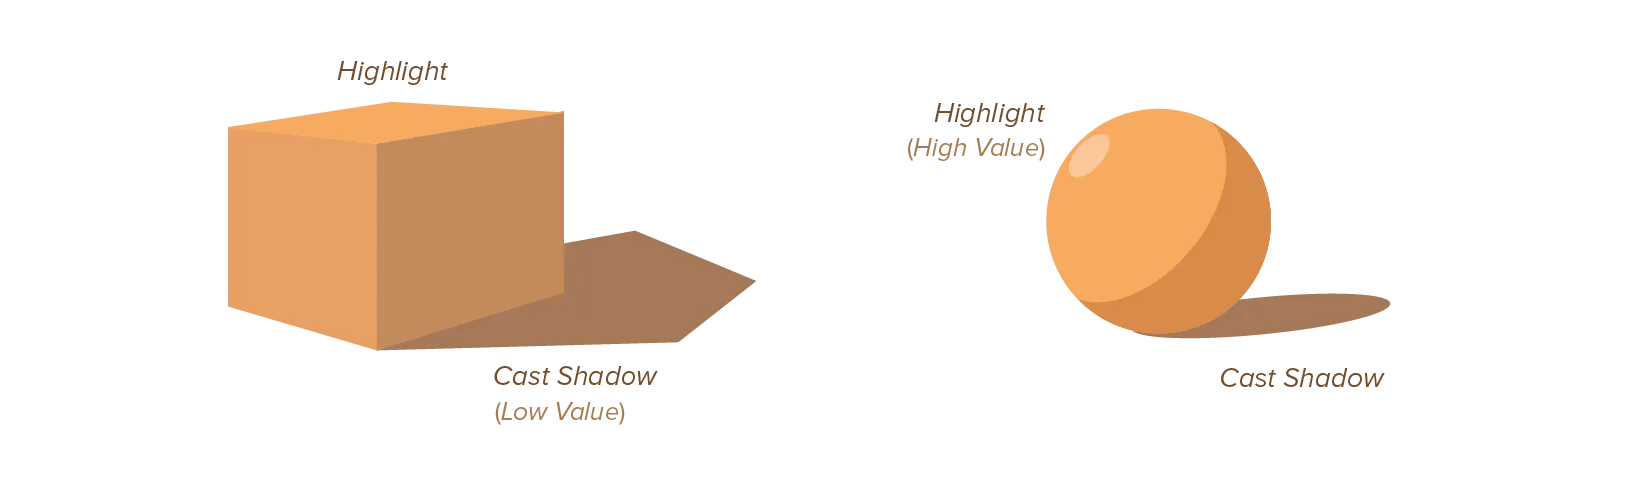 Examples of shading using simple cues and value differences.